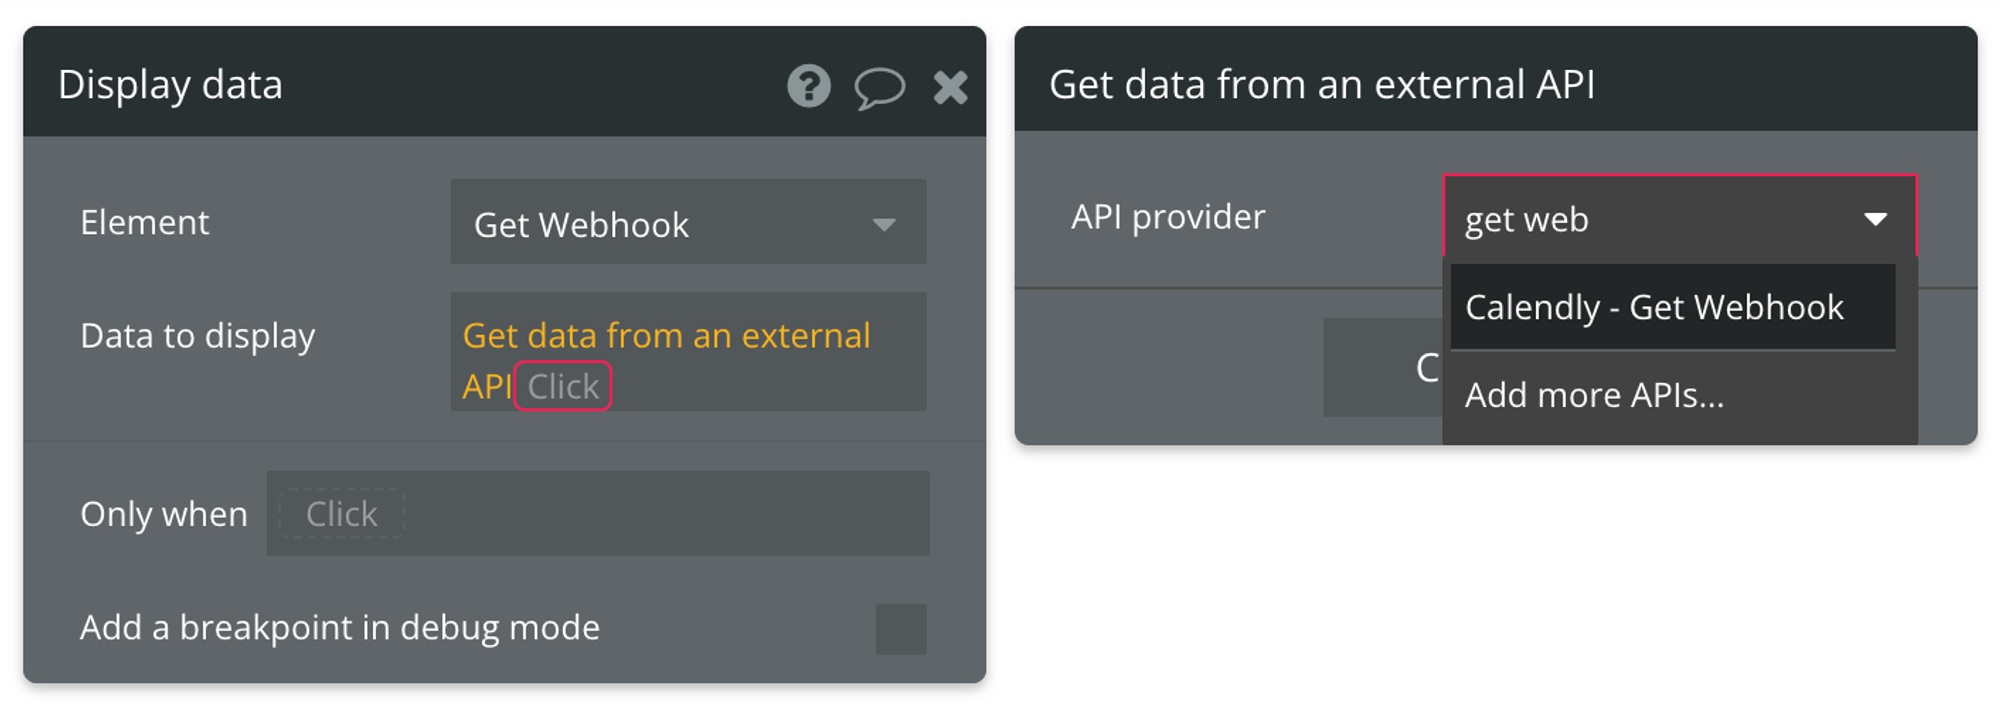 Select "Get data from external API" from the list of data sources, then find Calendly - Get Webhook from the list of API providers